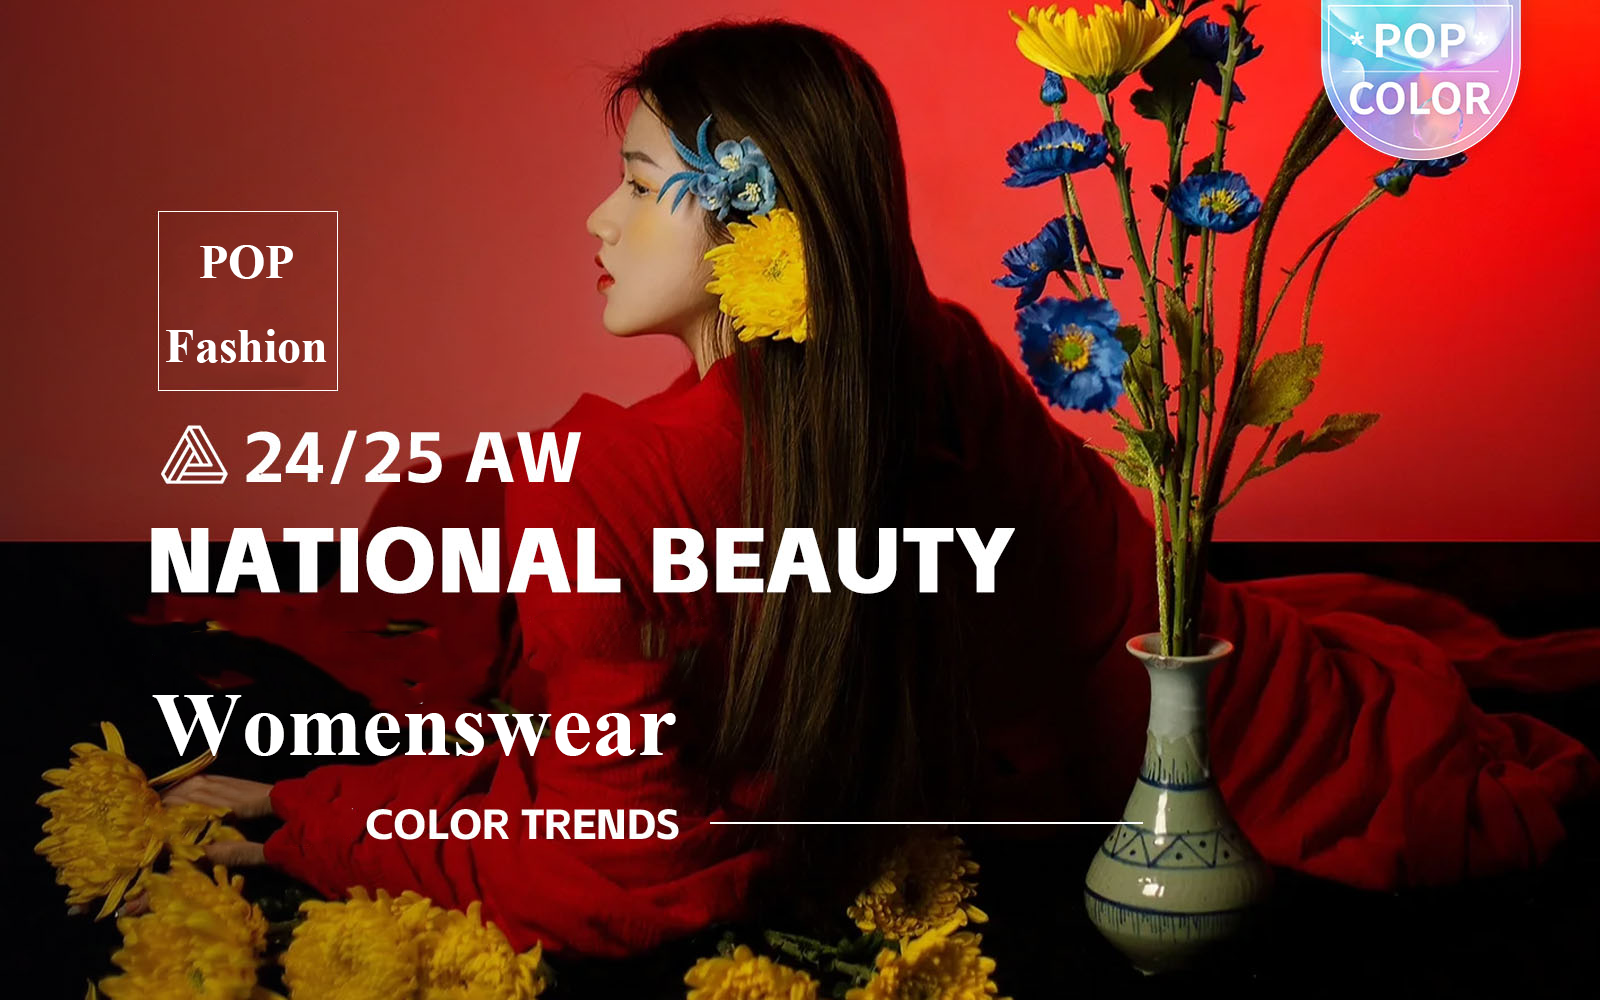 National Beauty -- The Color Trend for Womenswear